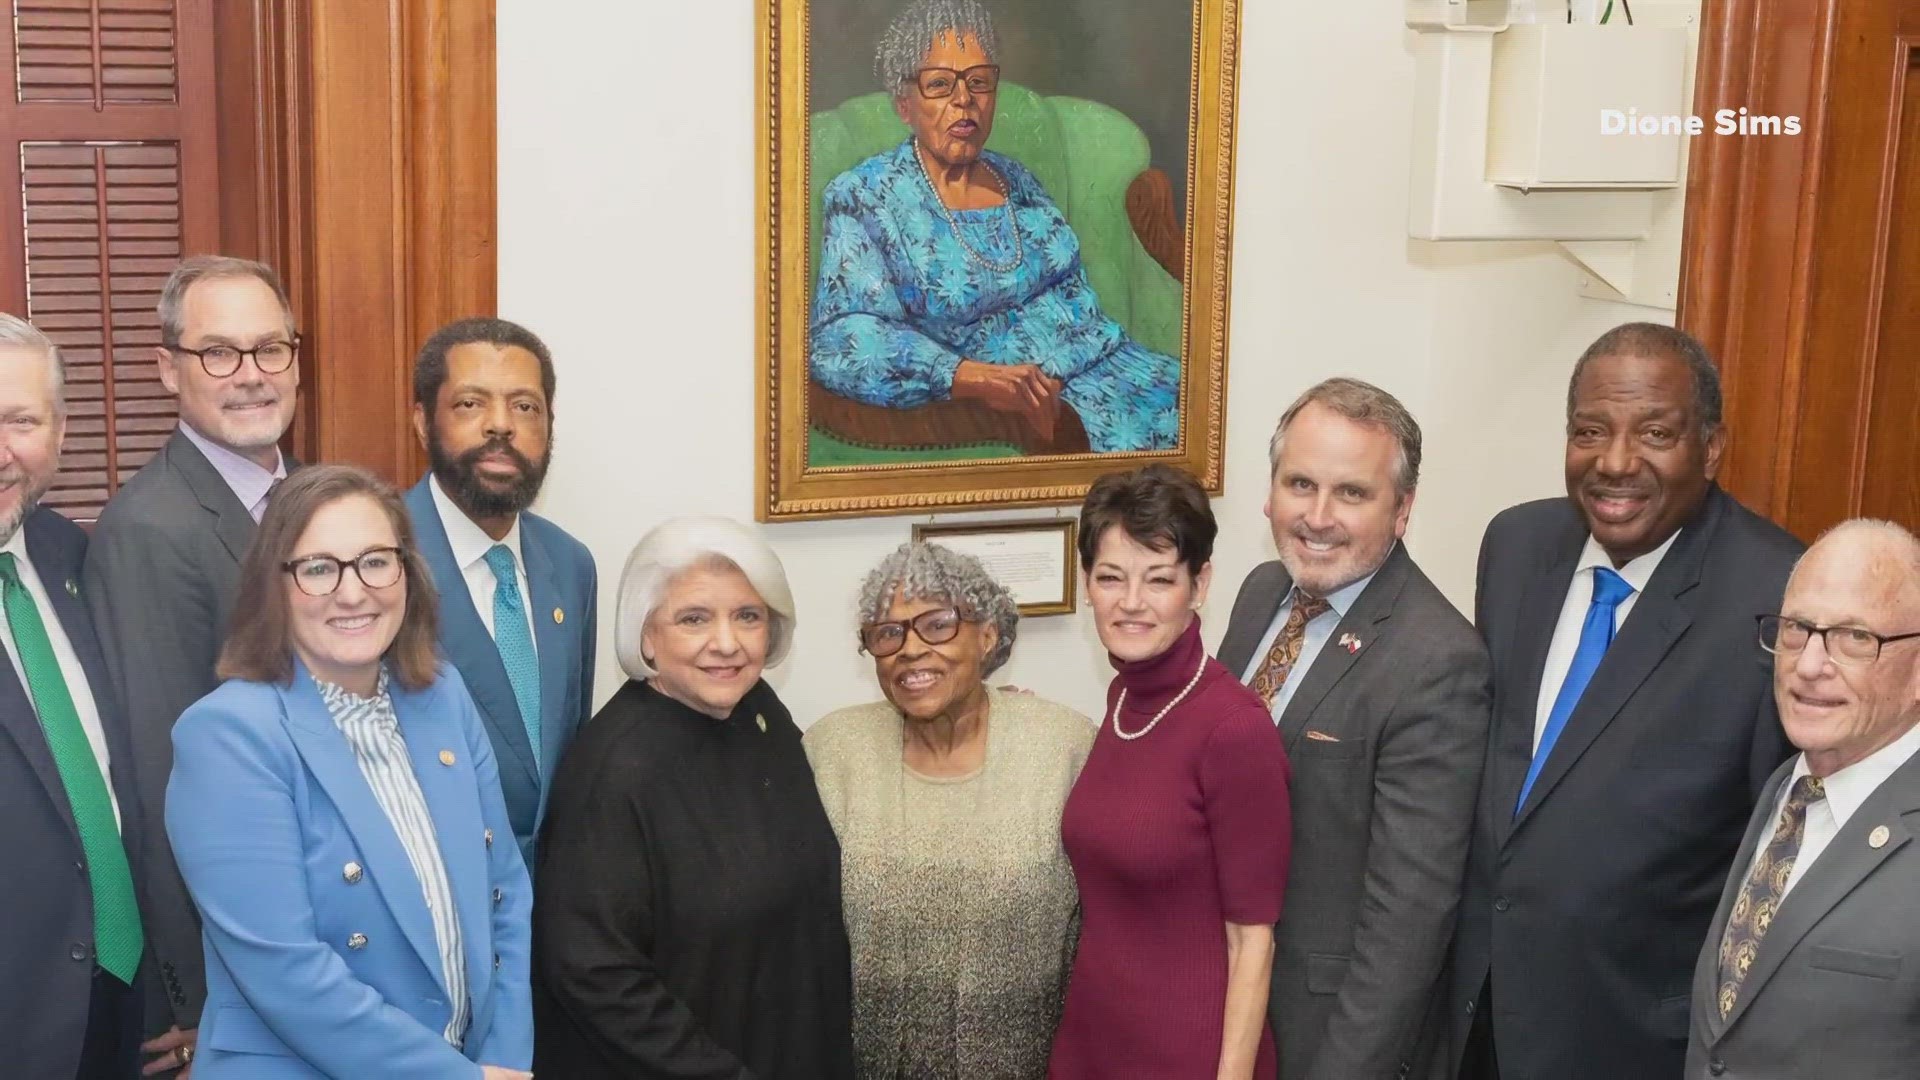 Family, friends, and Texas Lawmakers joined Ms. Opal Lee, the Grandmother of Juneteenth, for the installation of her portrait in Austin in the Senate Chambers.